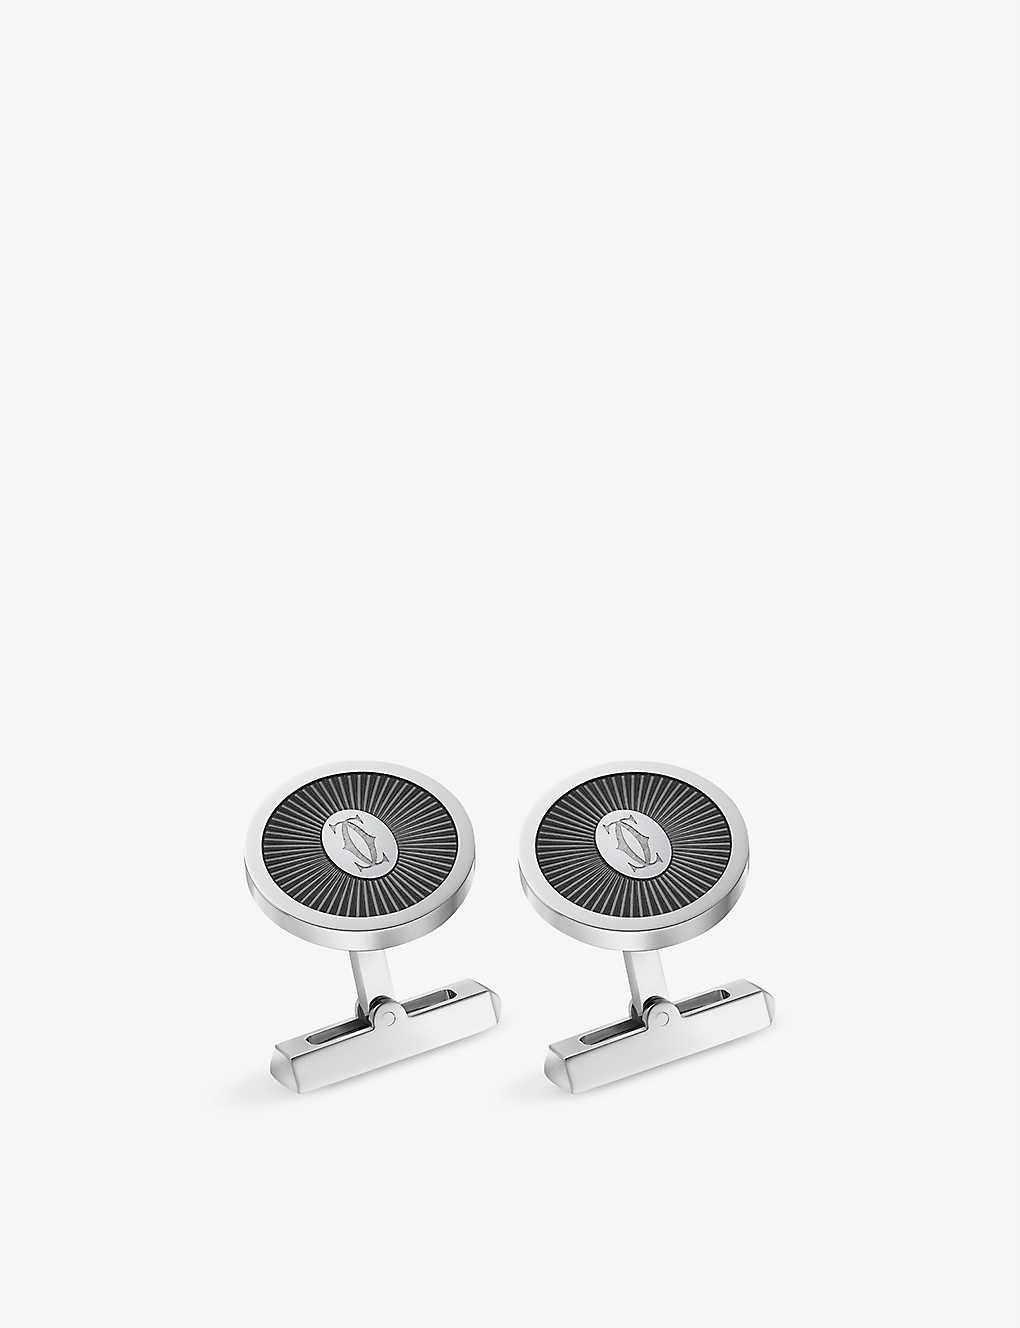 Cartier Mens Silver And Black Double C De Palladium-plated Sterling-silver Cufflinks